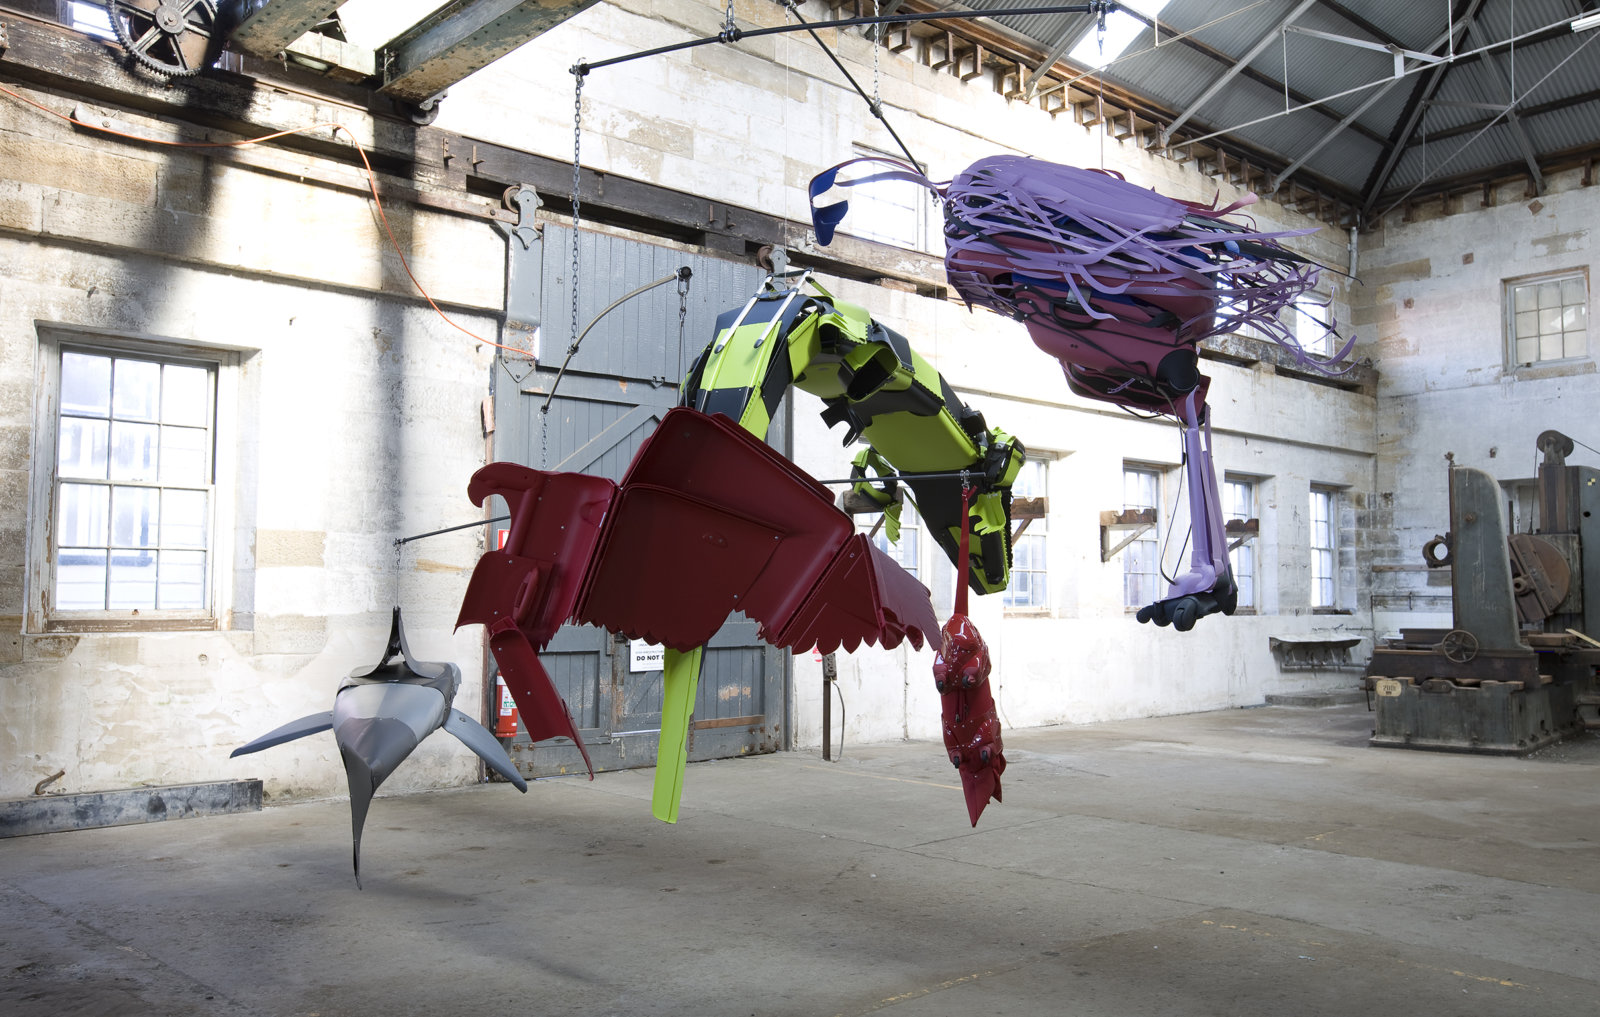 Brian Jungen, Crux (as seen from those who sleep on the surface of the earth under the night sky), 2008, suspended mobile of steel, cut up travel suitcases, rowboat with oars installed on ground, dimensions variable. Installation view, Sydney	Biennale,	Sydney,	Australia, 2008